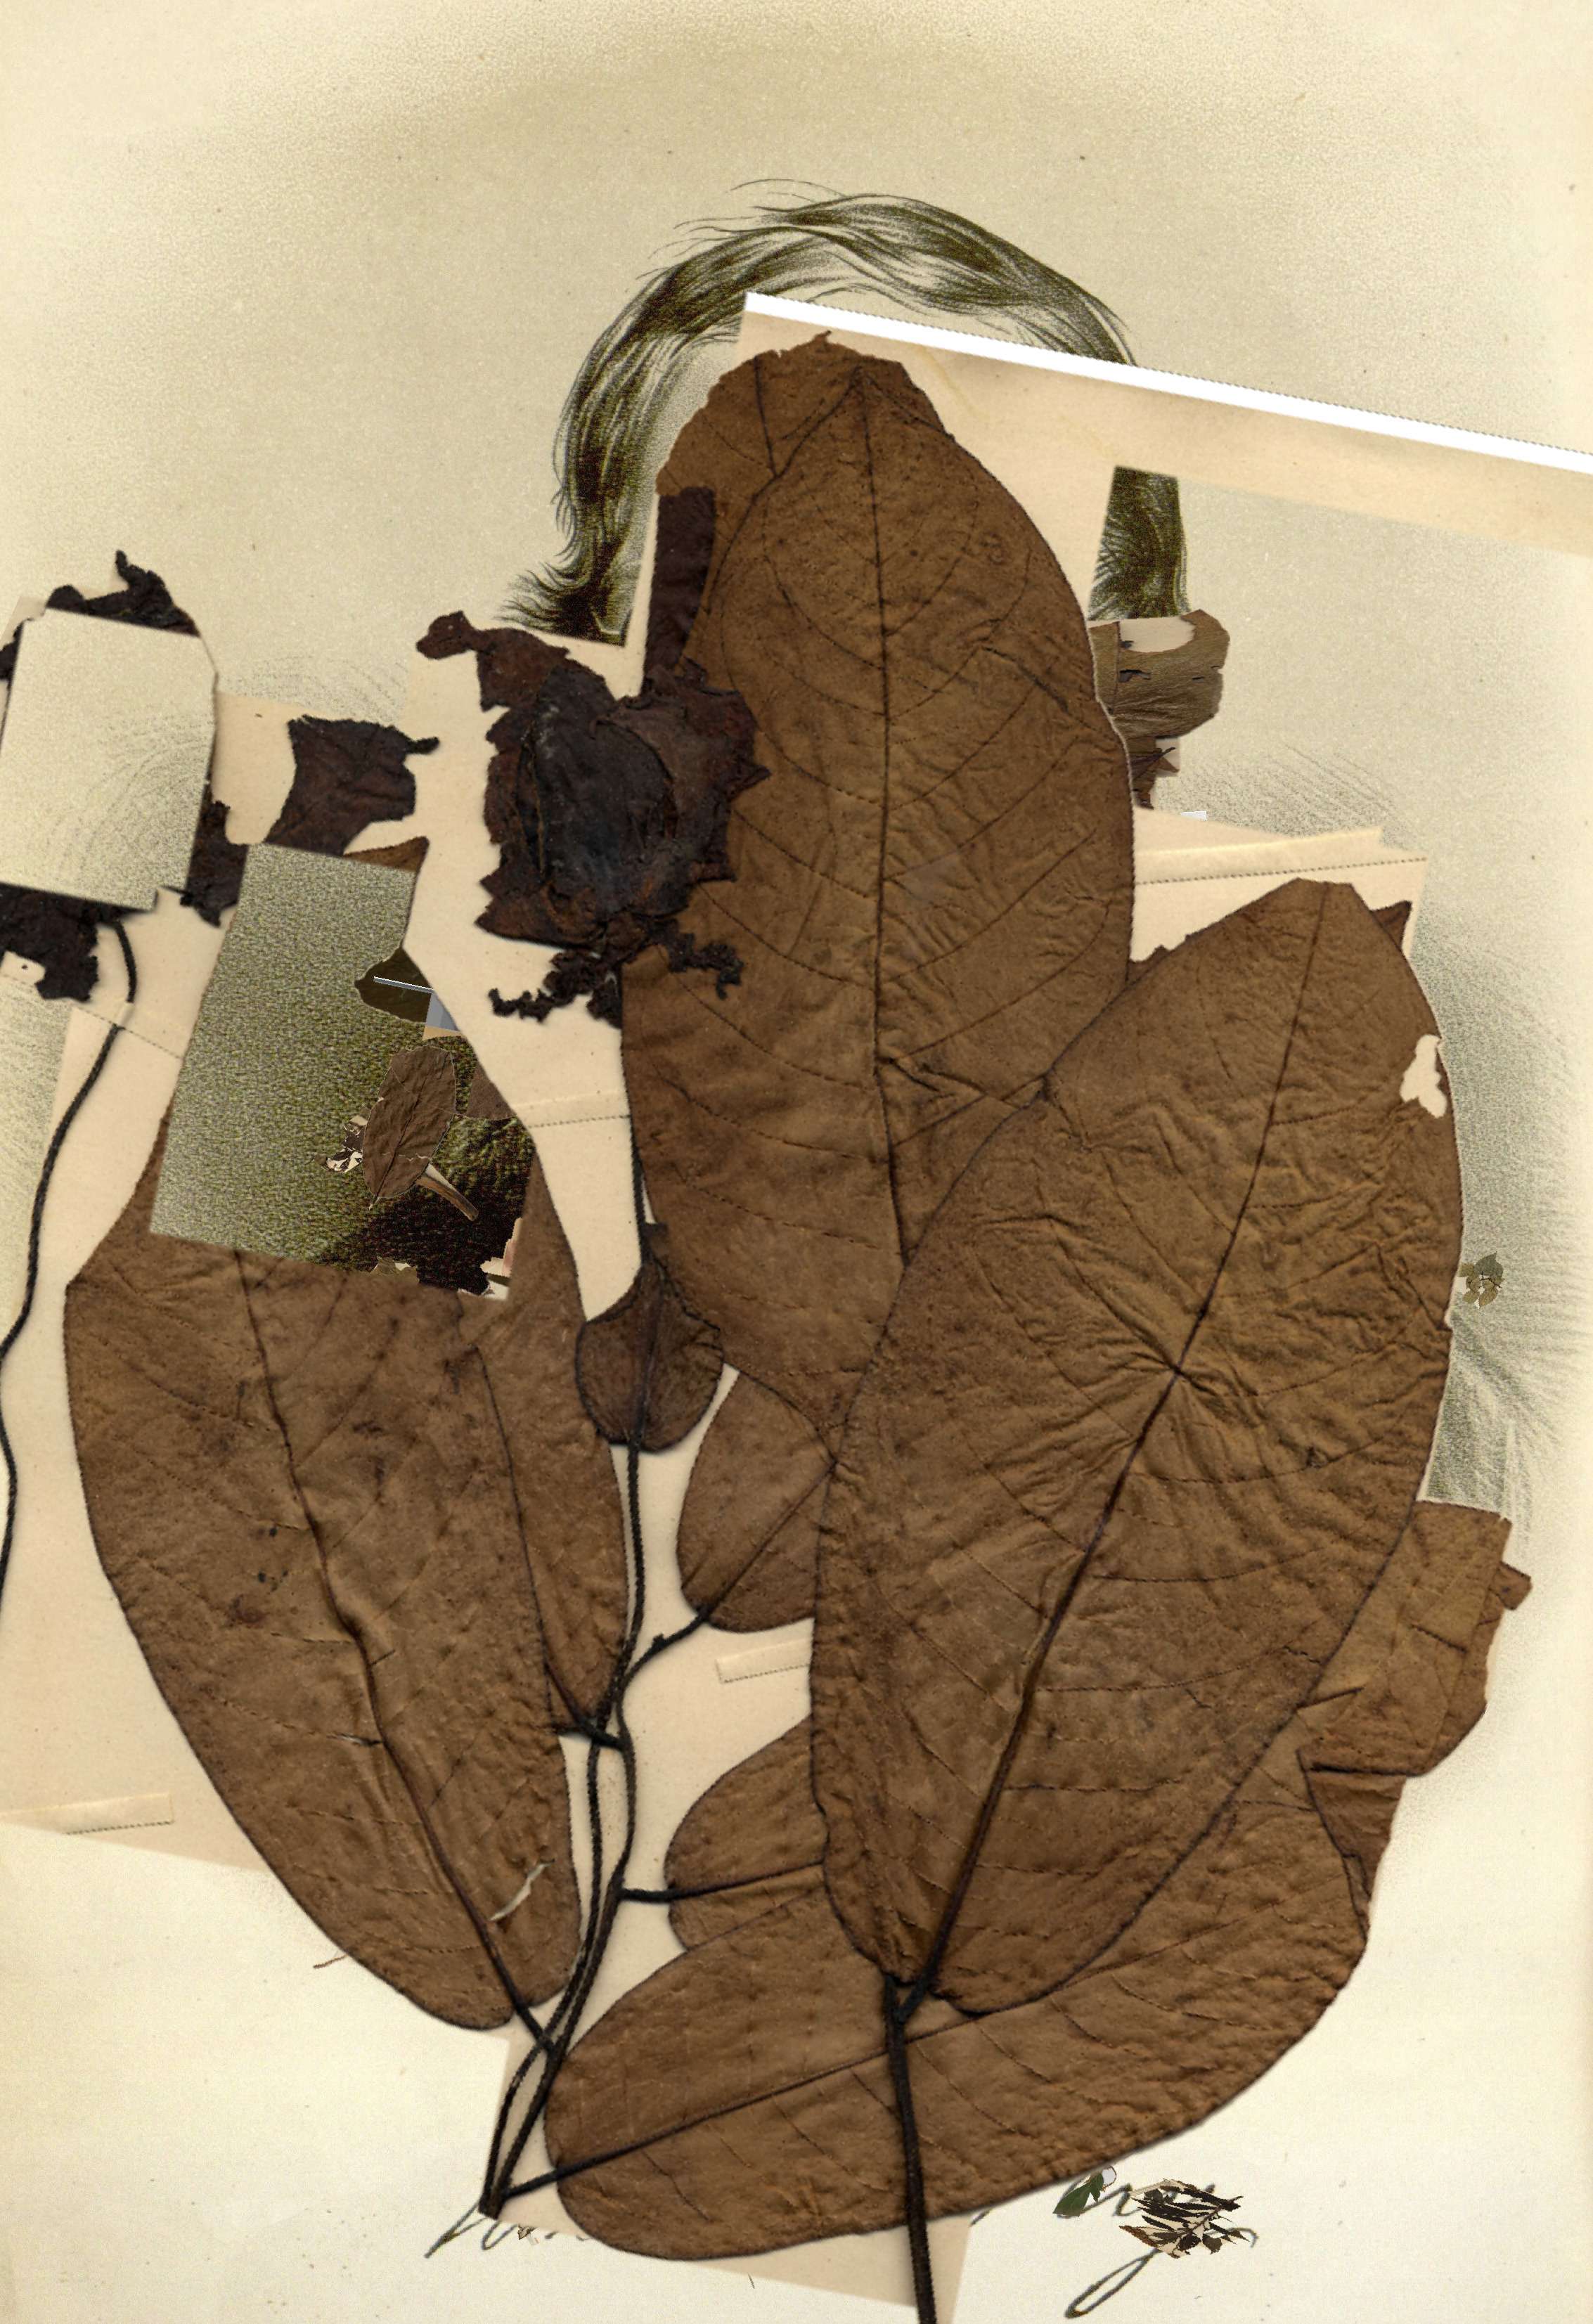 A taxonomist obscured by leaves and seeds